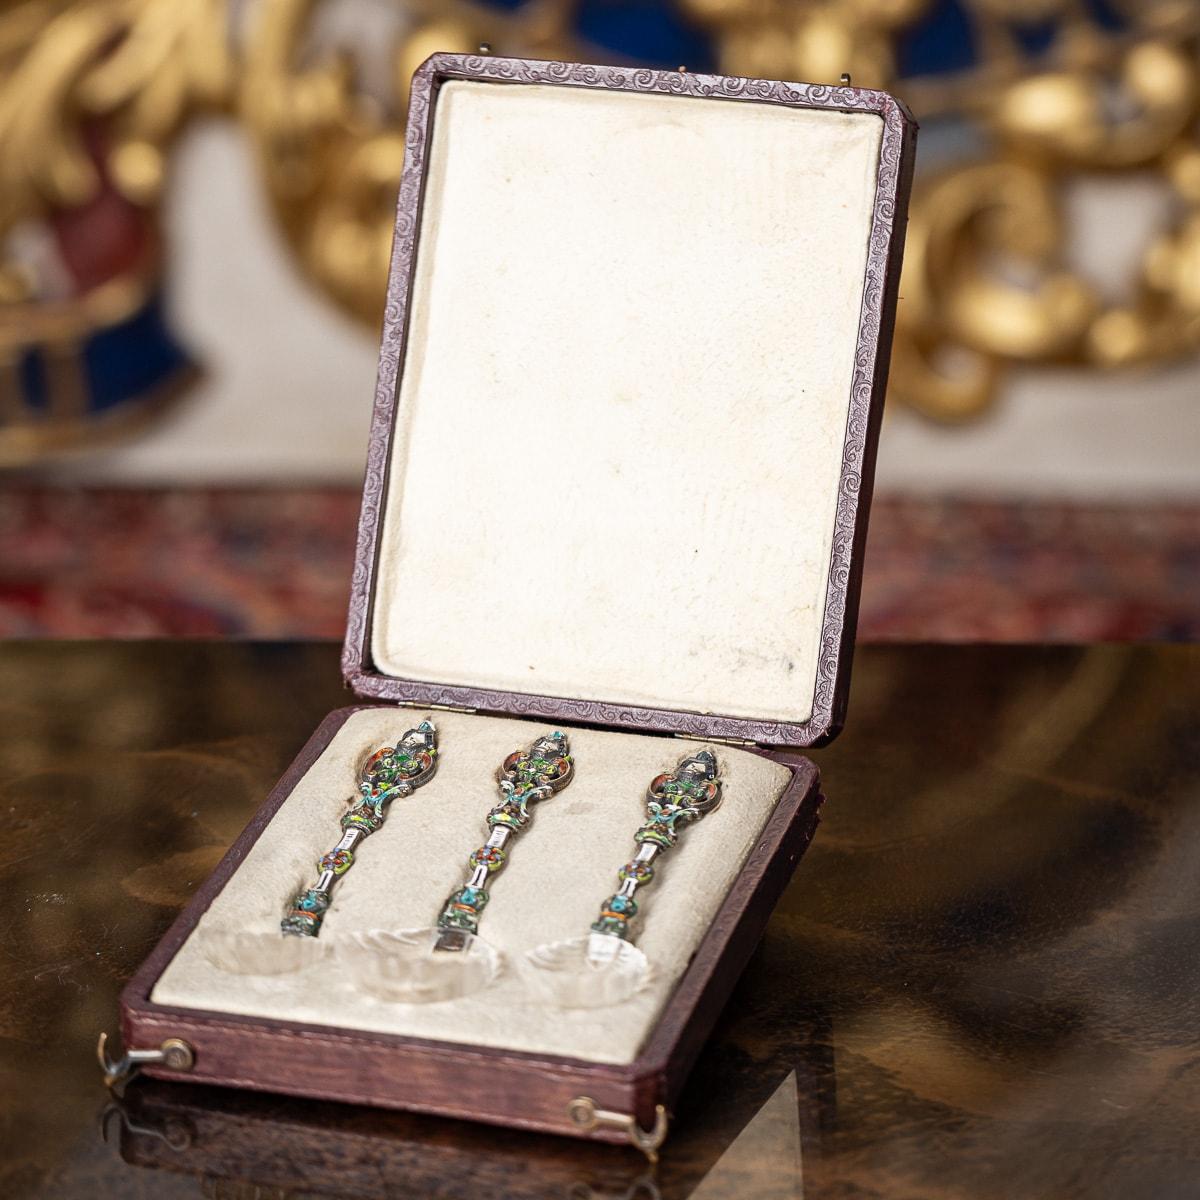 Antique 19th Century Austrian rare solid silver & enamel rock crystal set of three spoons. Scallop shaped carved rock crystal bowls set with highly decorative, pierced and enamelled, cast solid silver handles, comes in its original retail case.